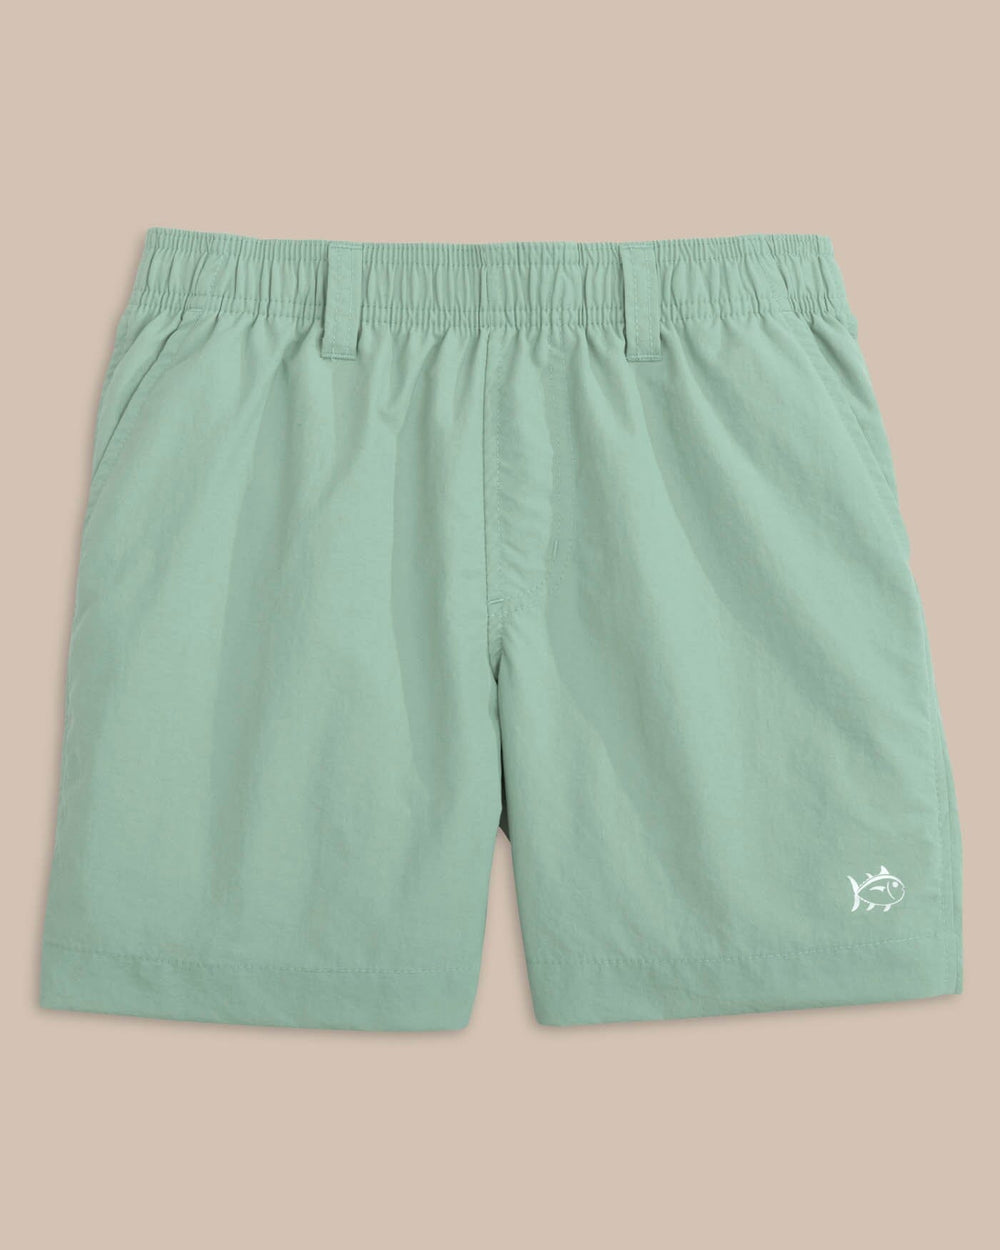 The front view of the Southern Tide Boys Shoreline Active Short by Southern Tide - Green Surf